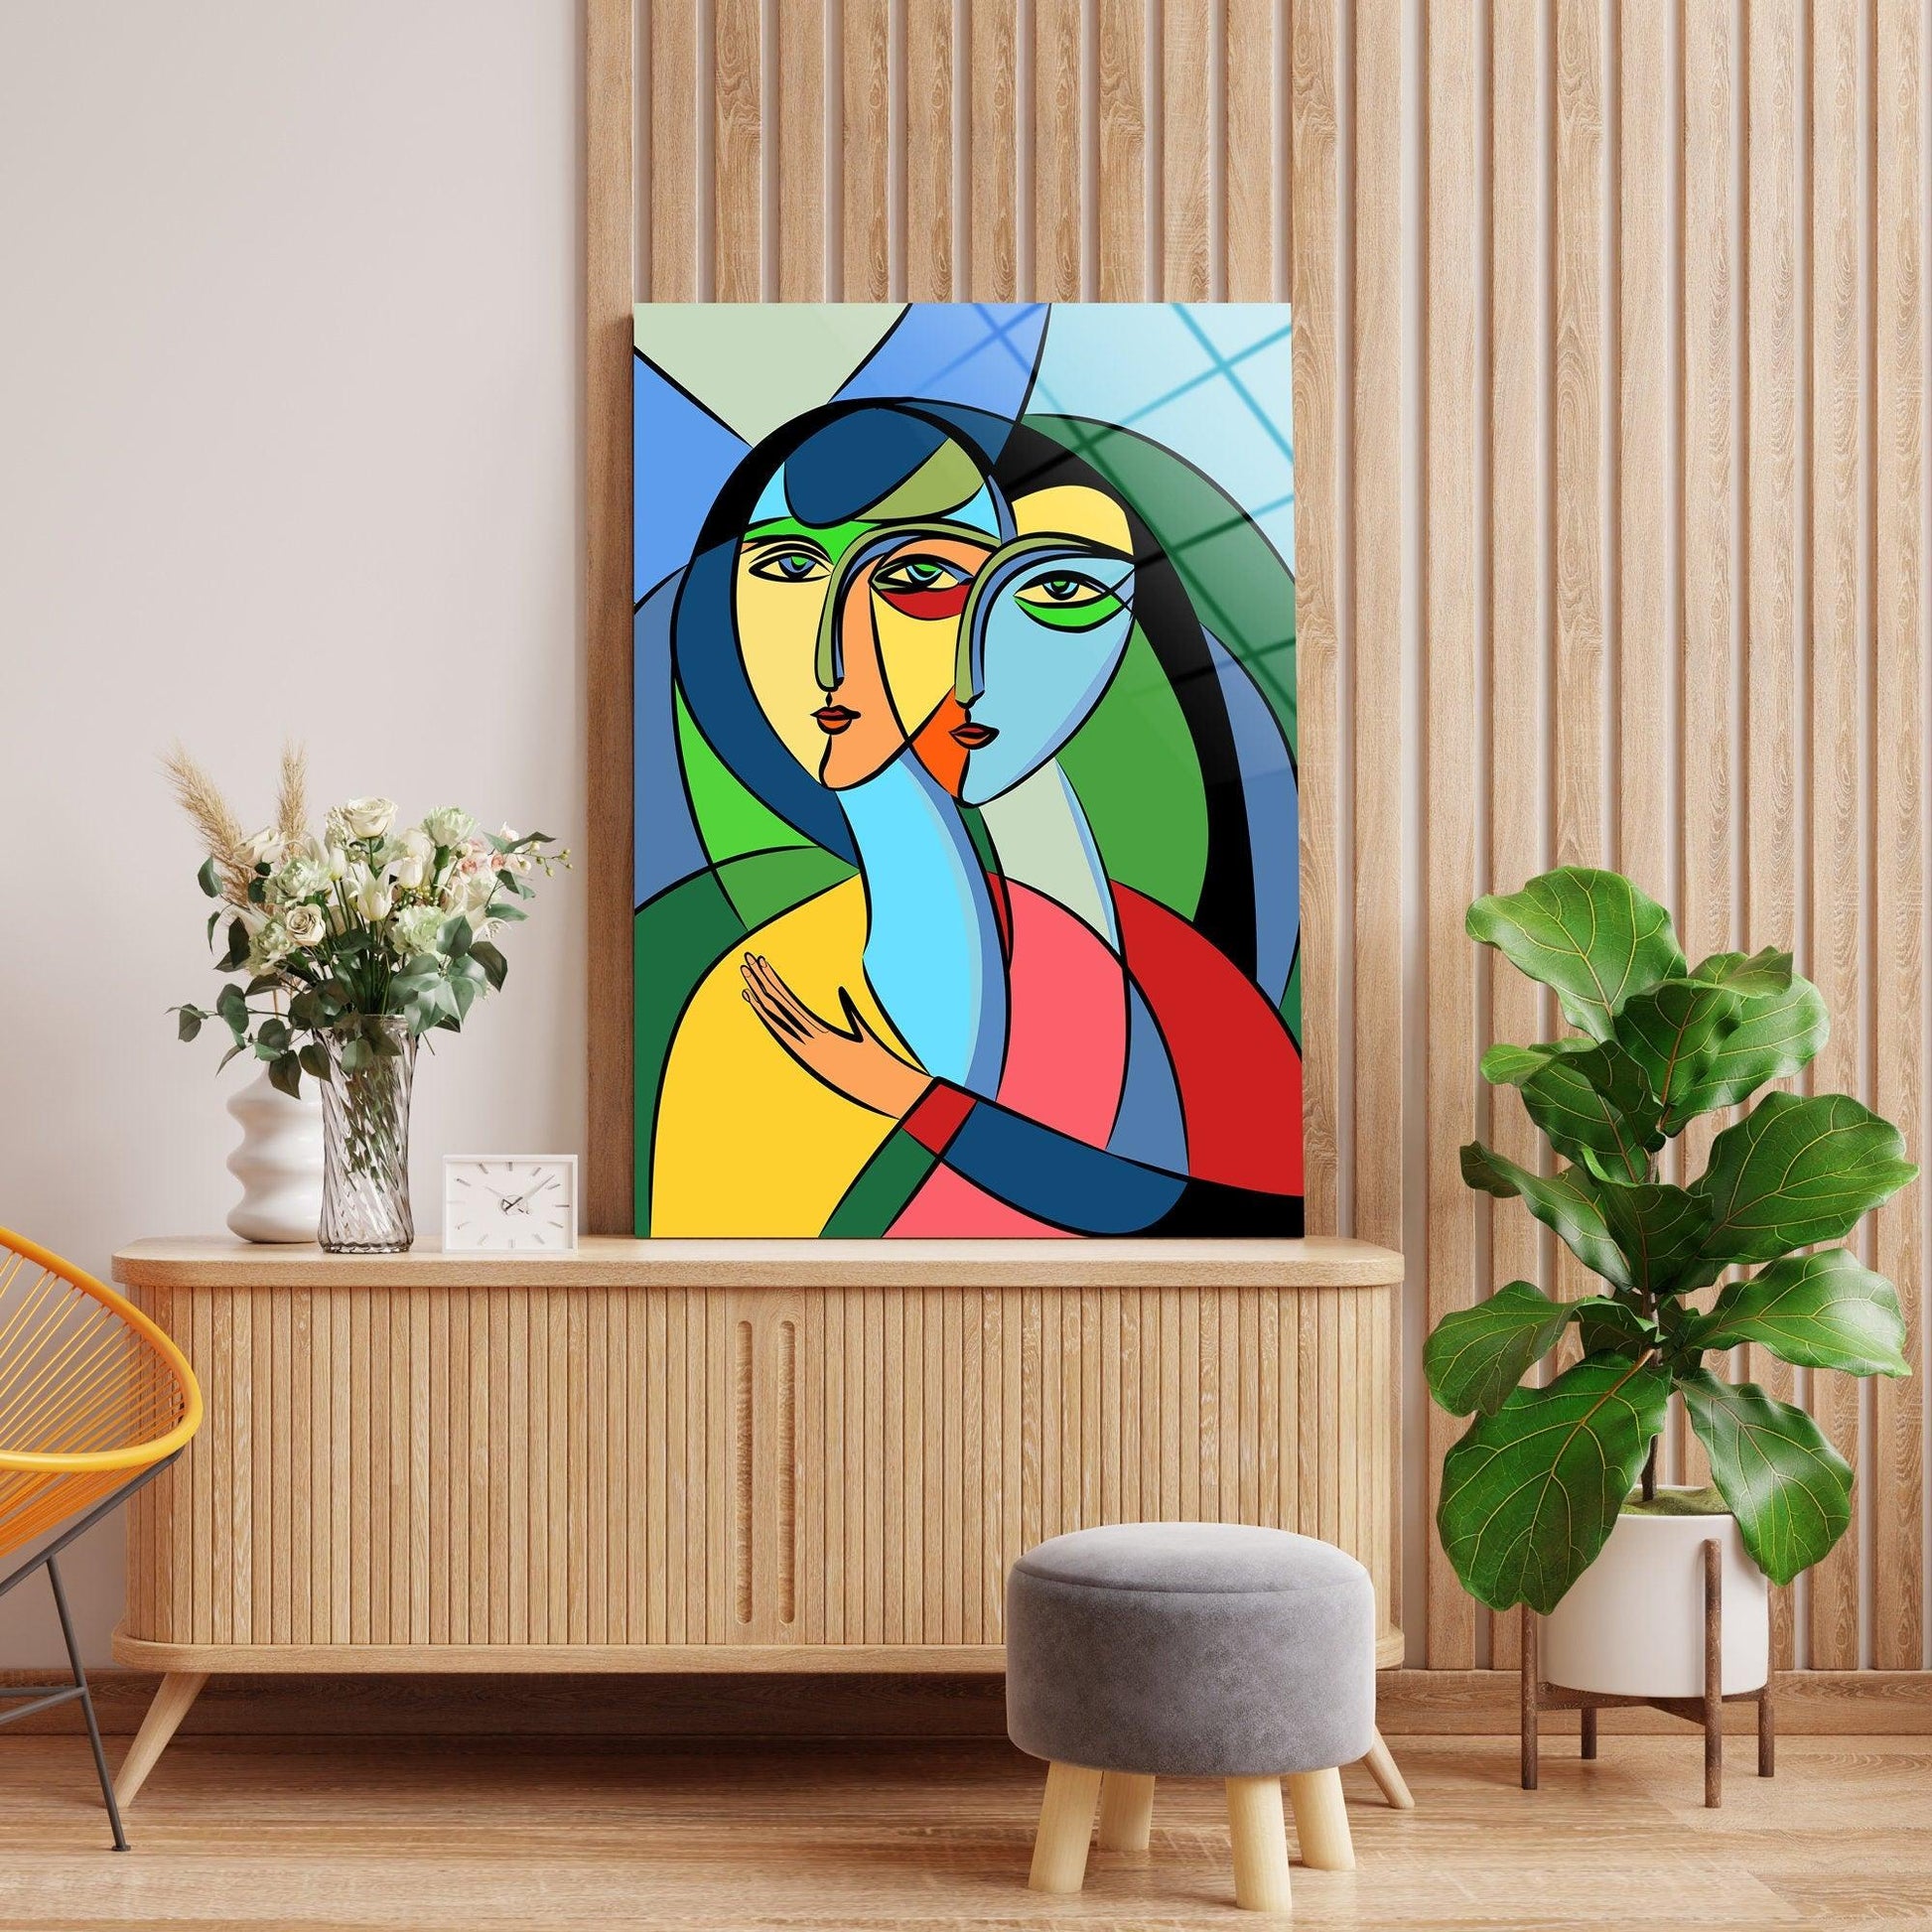 abstract Glass printing Wall Art| Home Decor Gift, Large Wall Decor, Painting Wall Art, Colorful Cubism canvas wall art, office decor gift